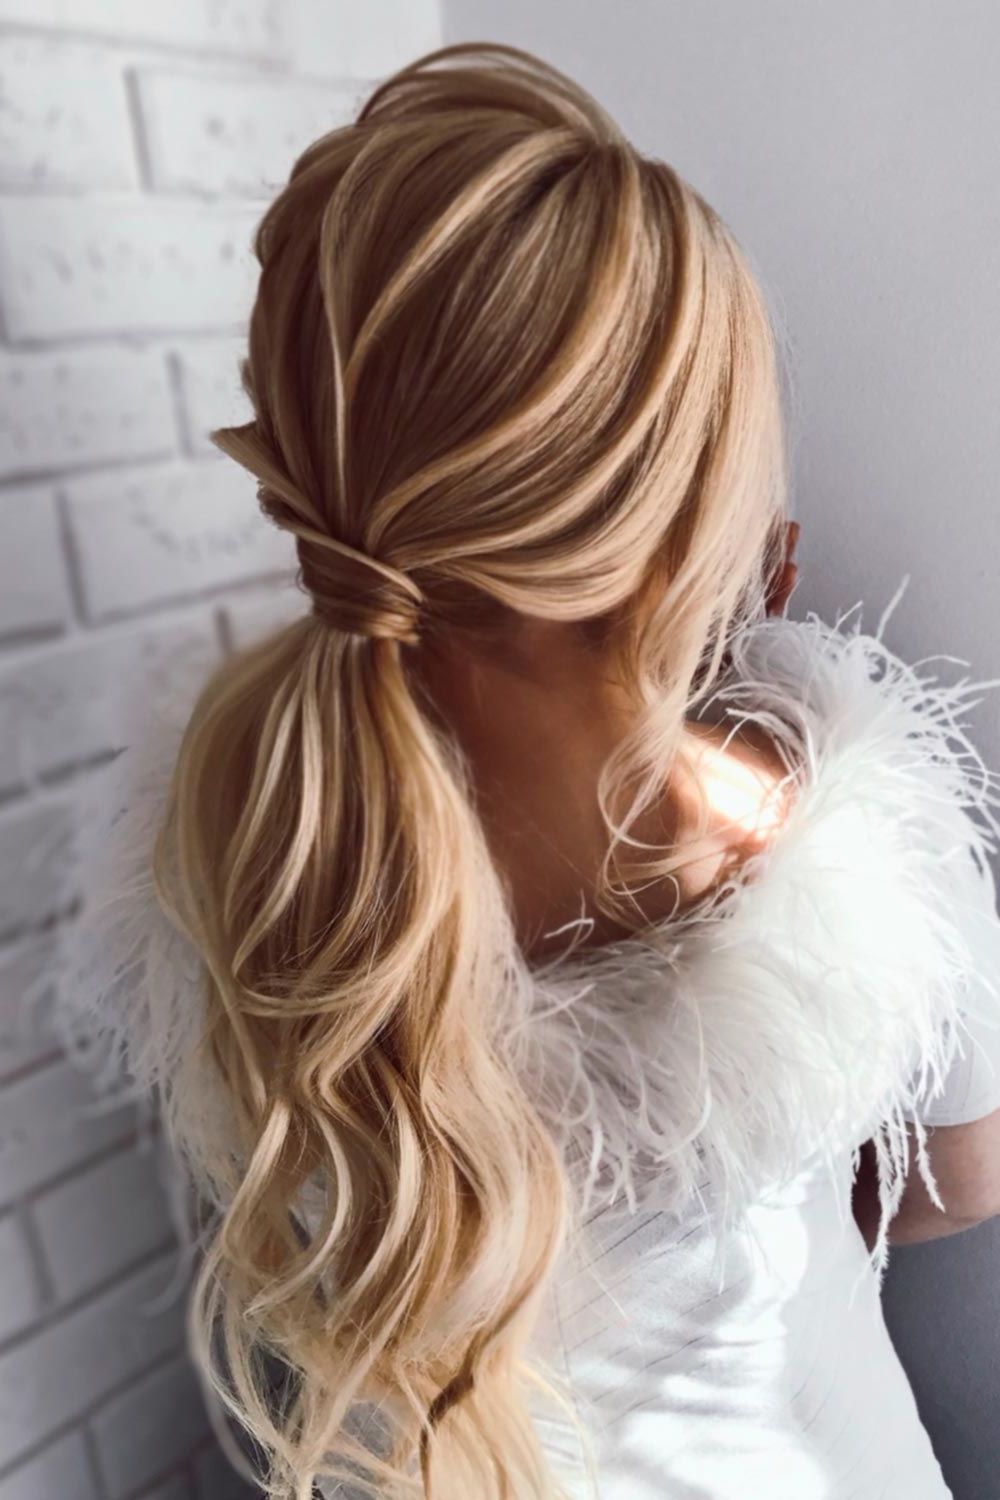 35 Unique Low Ponytail Ideas For Simple But Attractive Looks Throughout Best And Newest Low Pony Hairstyles With Bangs (View 17 of 20)